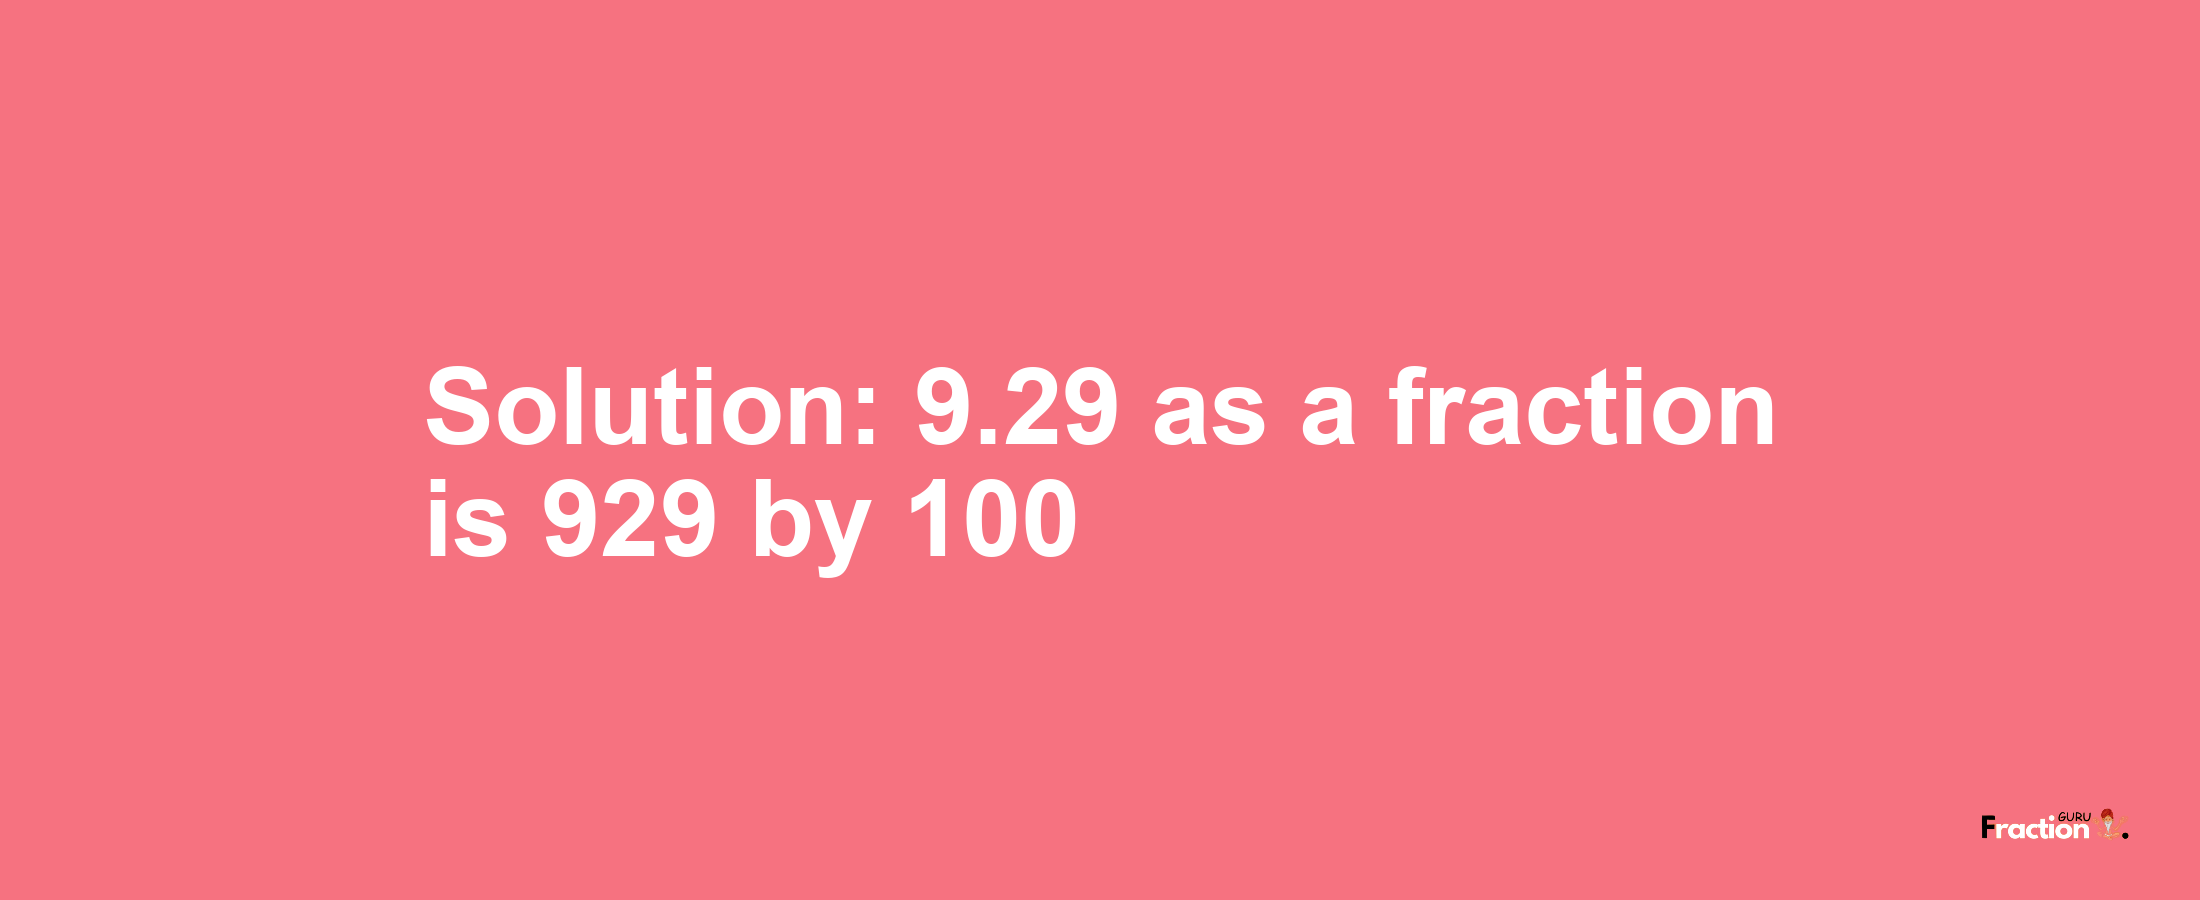 Solution:9.29 as a fraction is 929/100